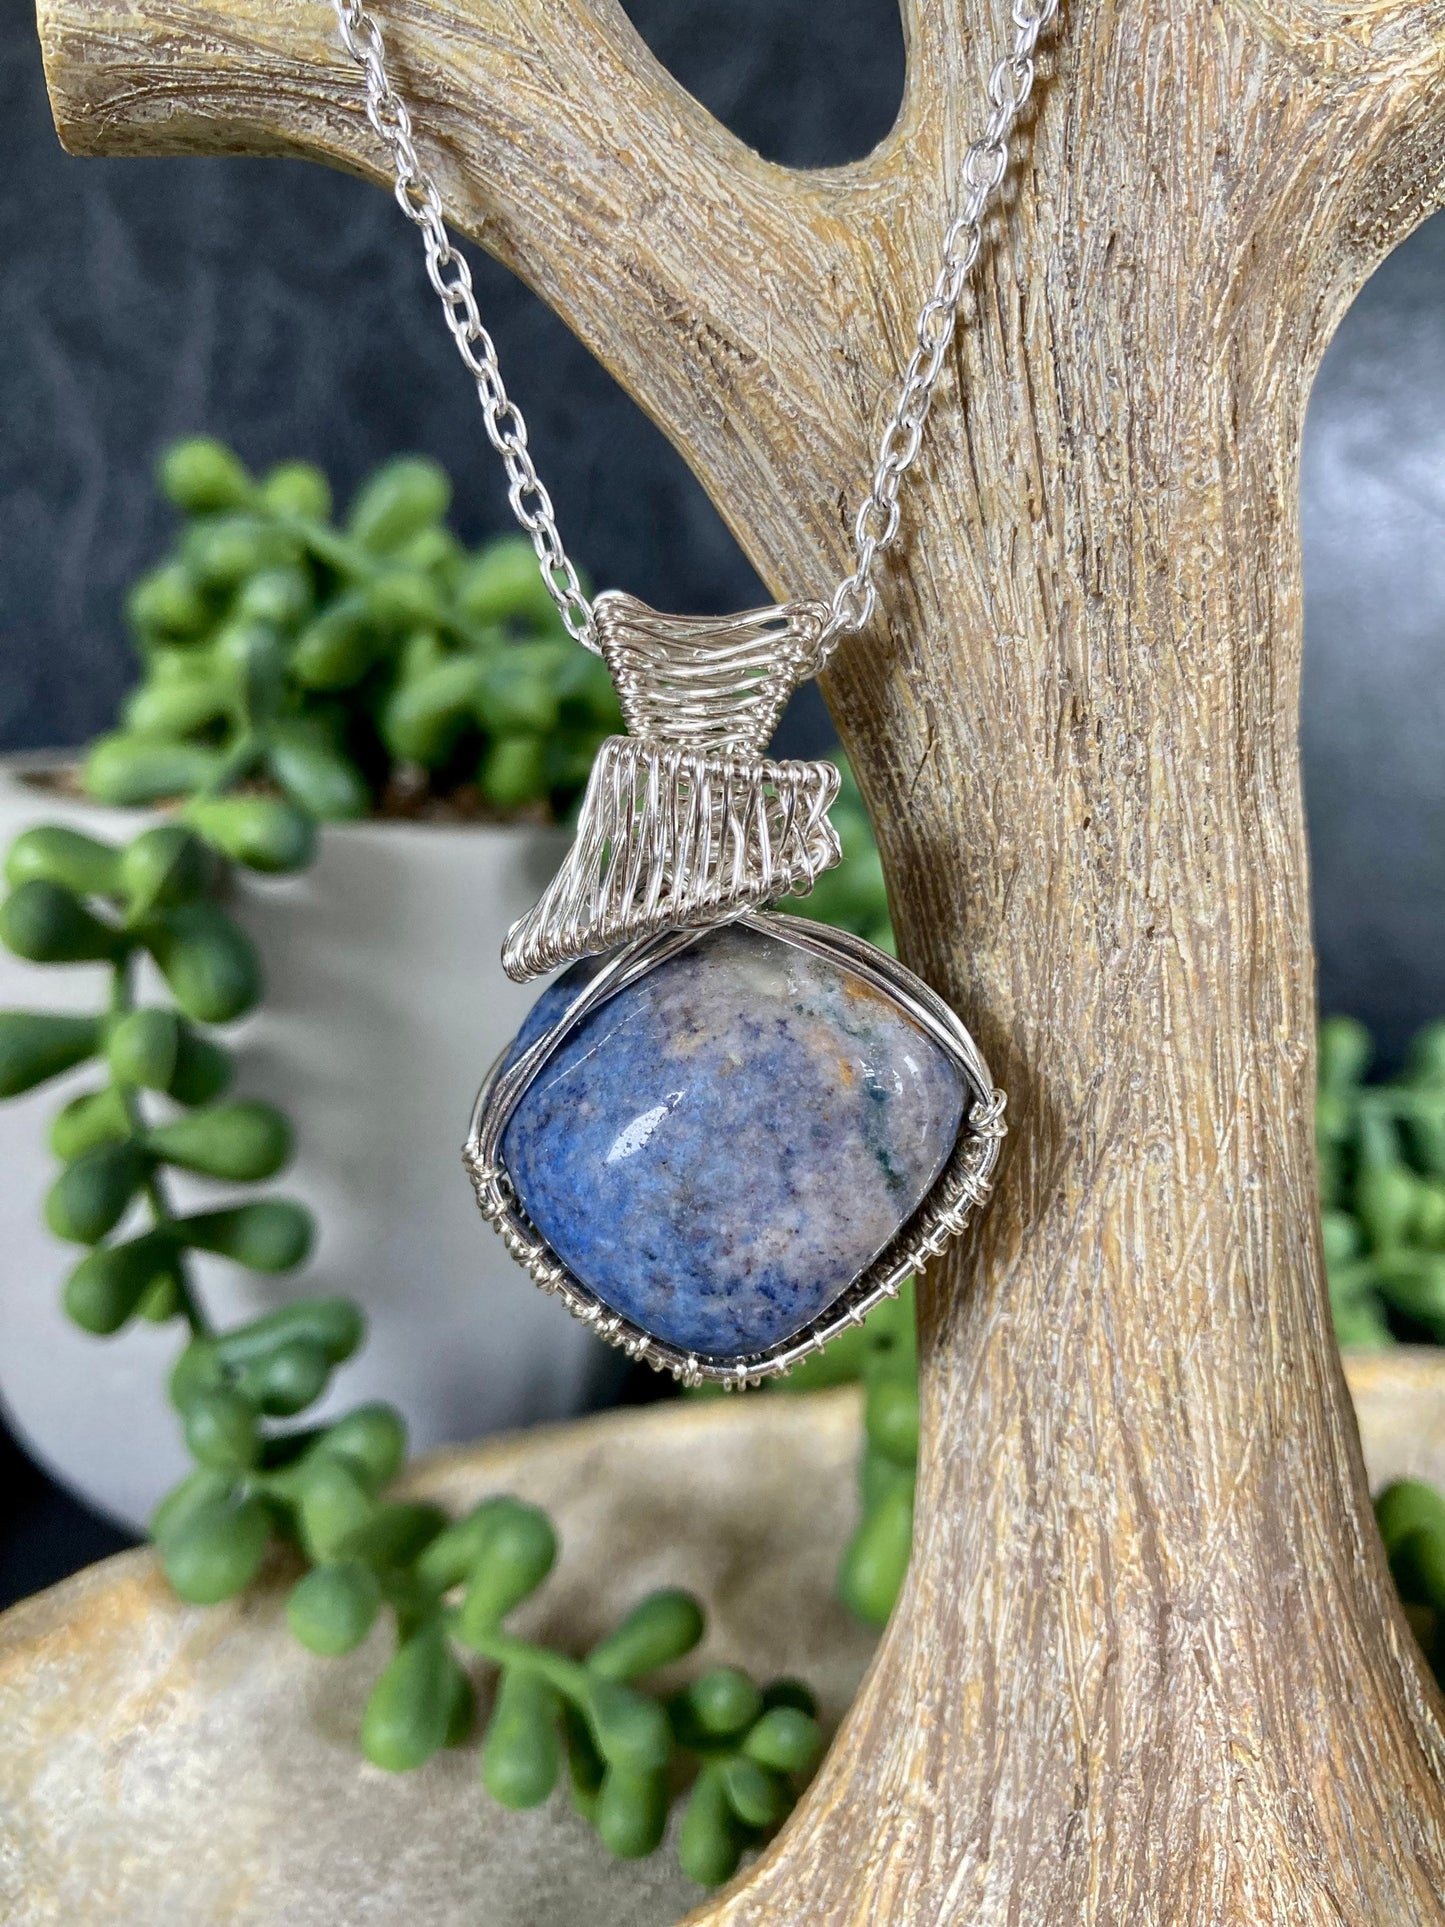 Dumortierite pendant handmade necklace wire wrapped natural stone with 18 inch length chain